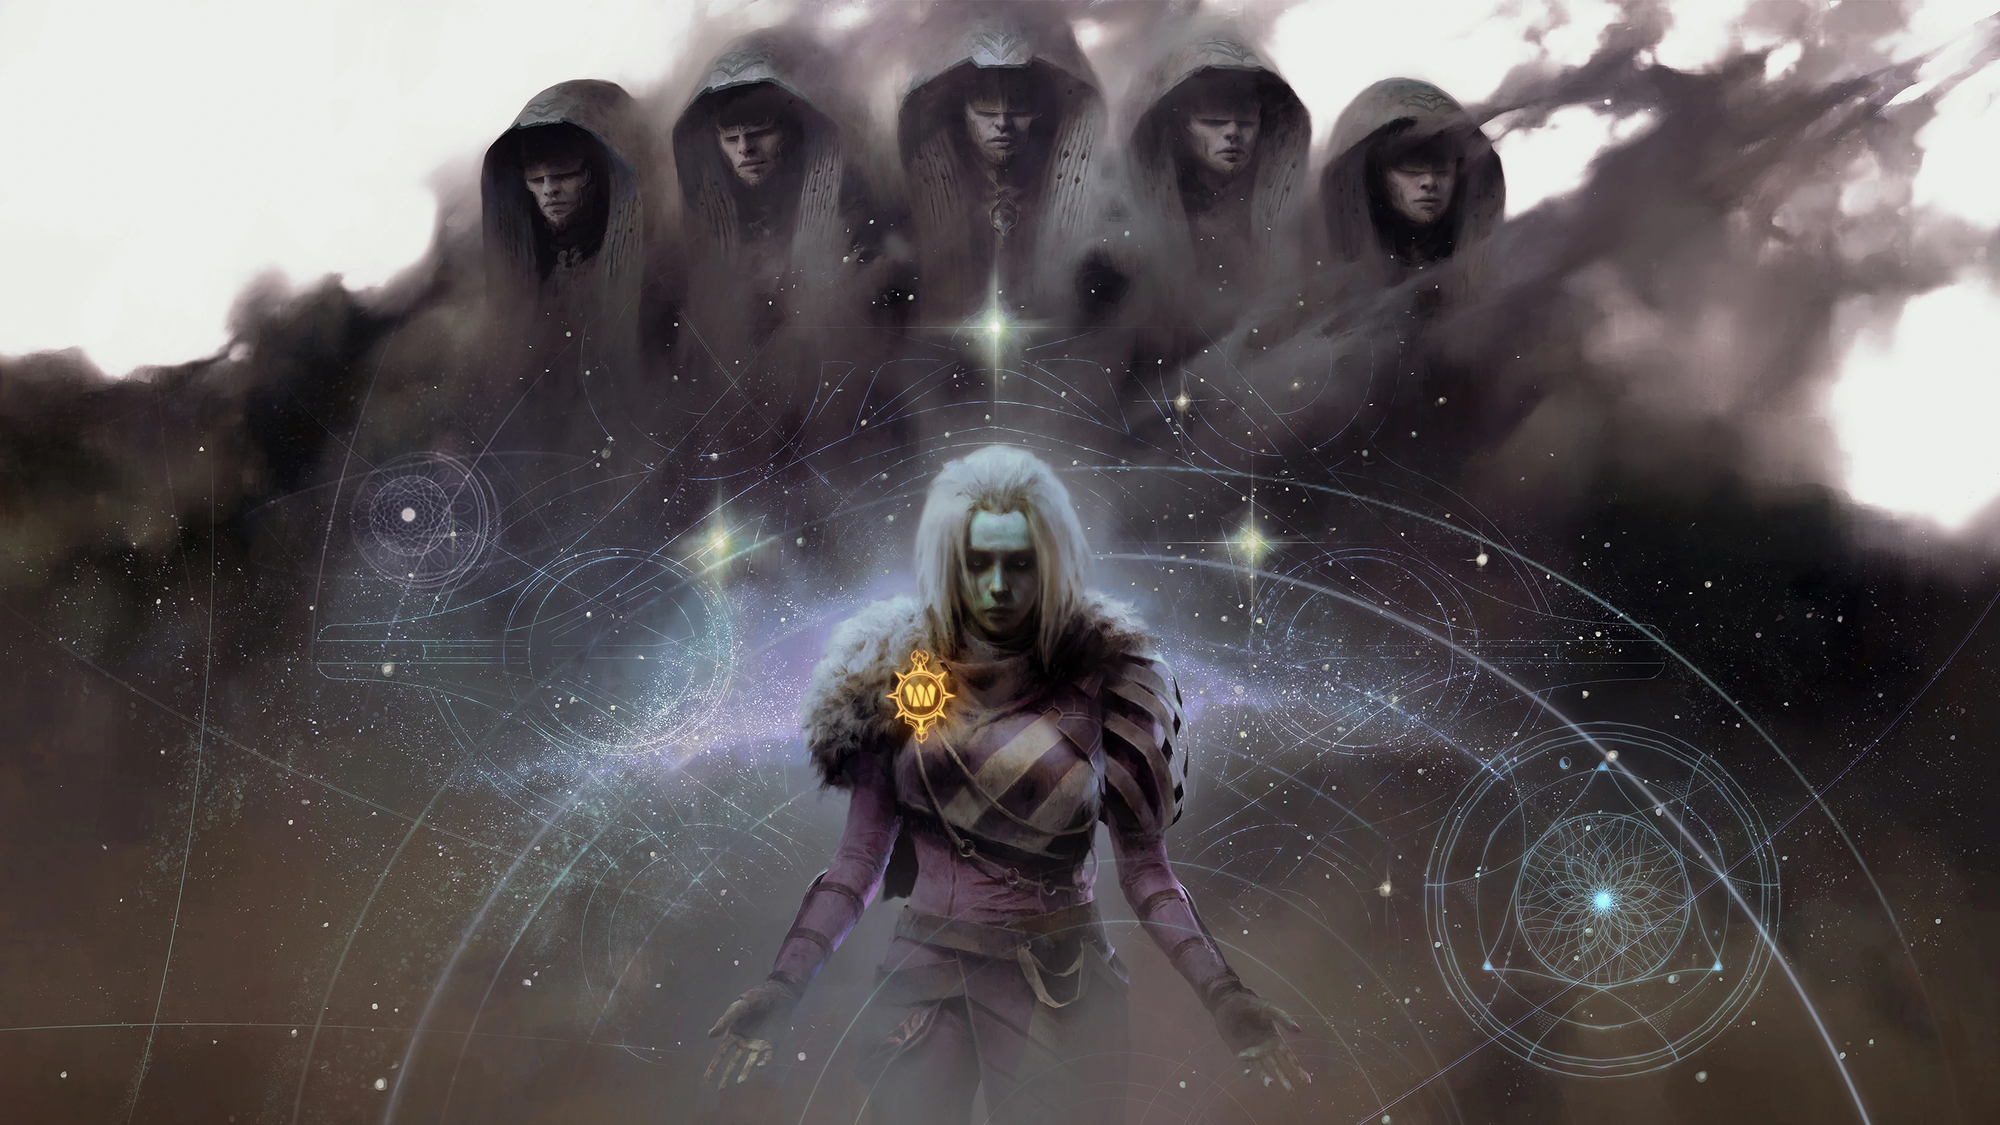 Key art of Season of the Lost, showcasing Mara sov, queen of the Awoken and her Techeuns in the background